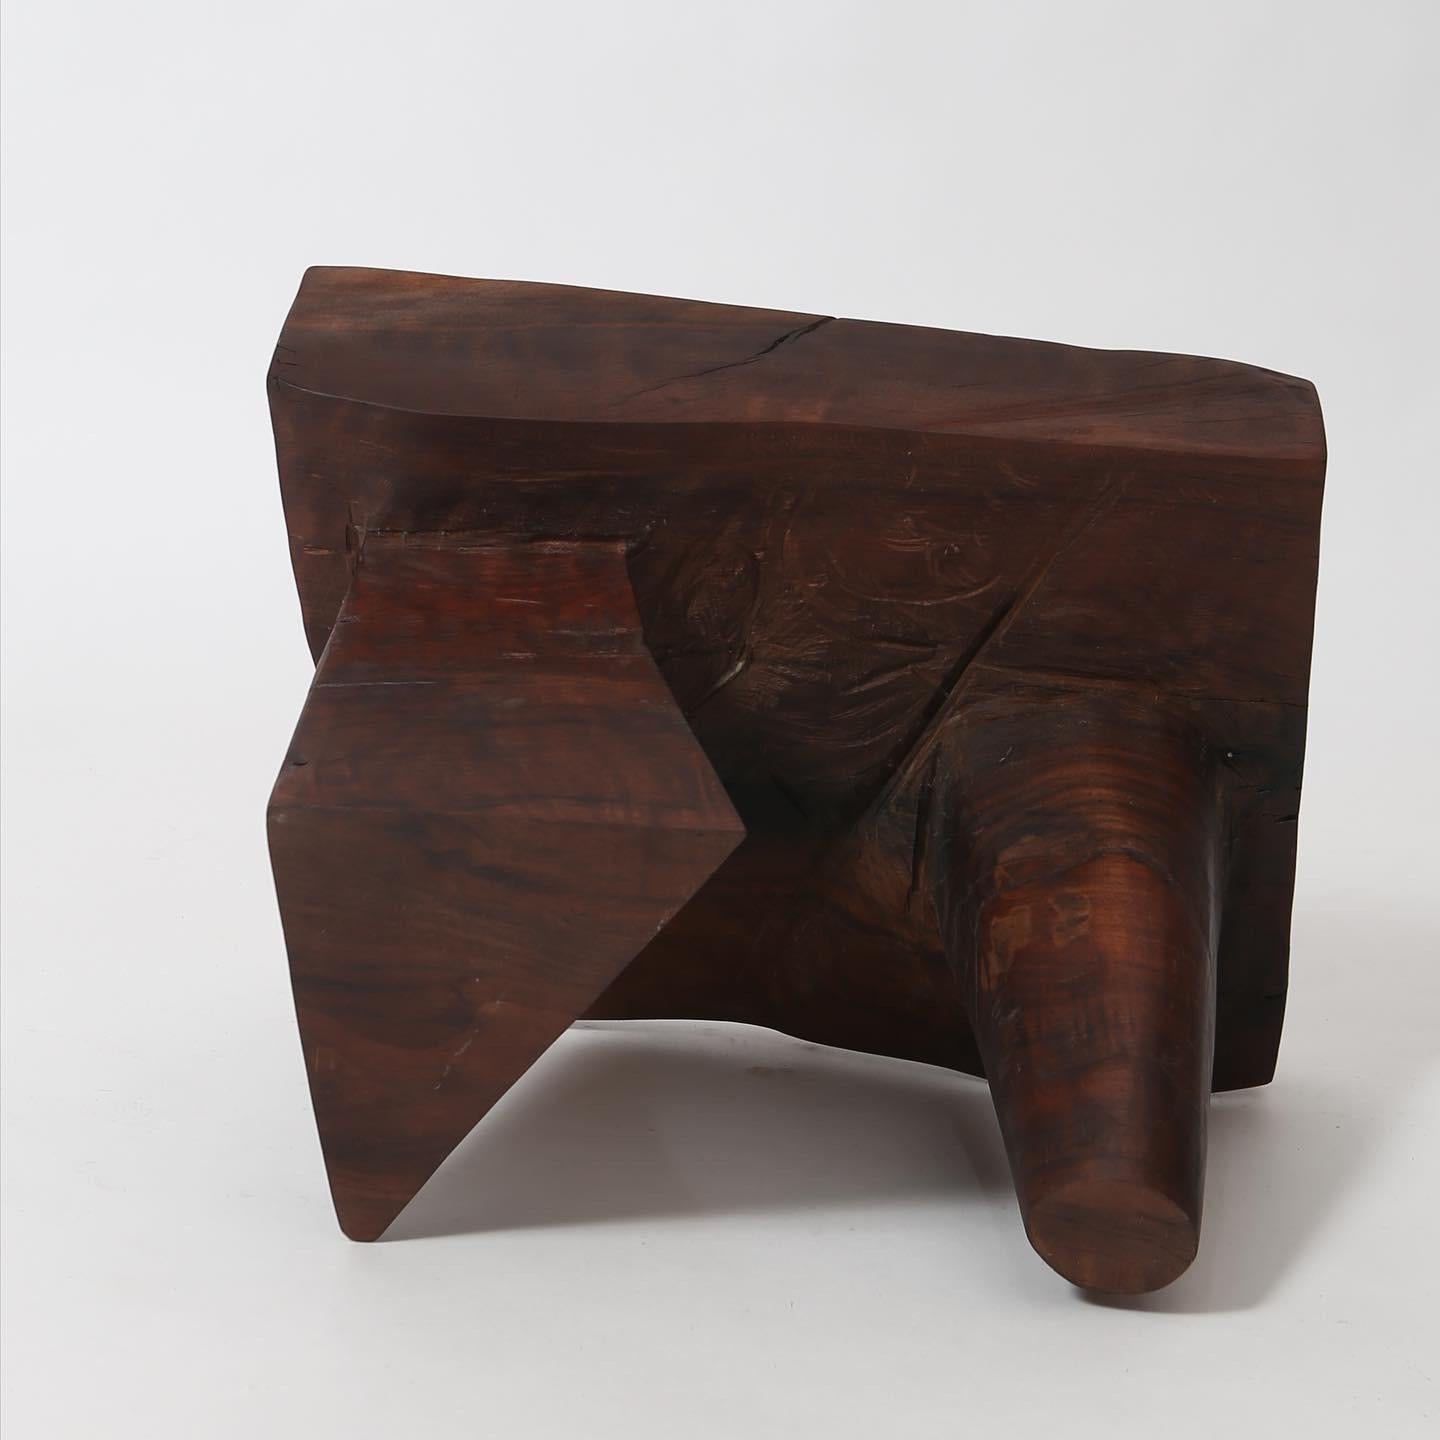 Contemporary Dolman Carved Wood Sculpture Table by Vince Skelly